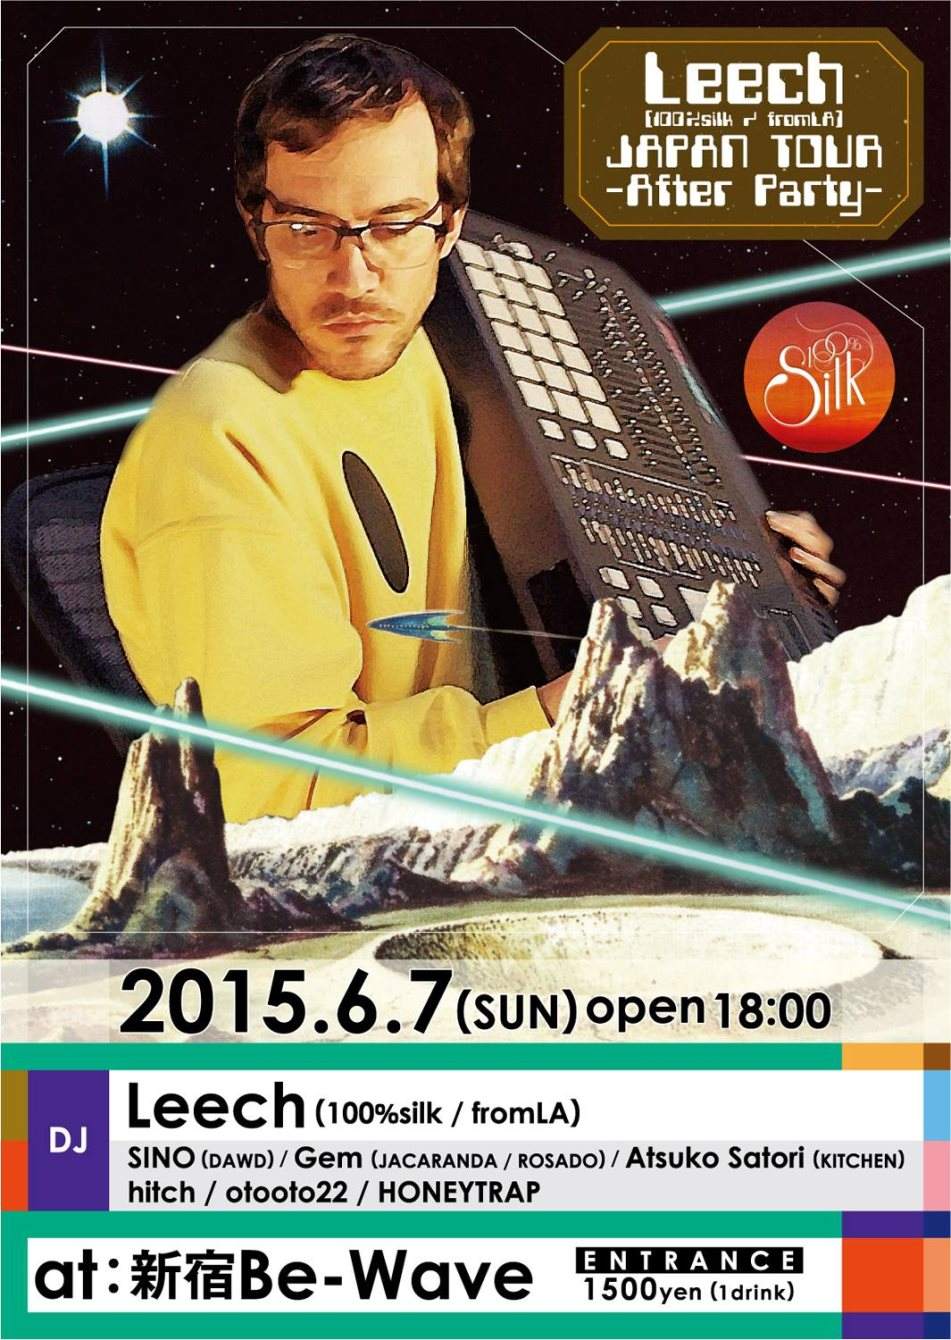 Leech Japan Tour -After Party - フライヤー表